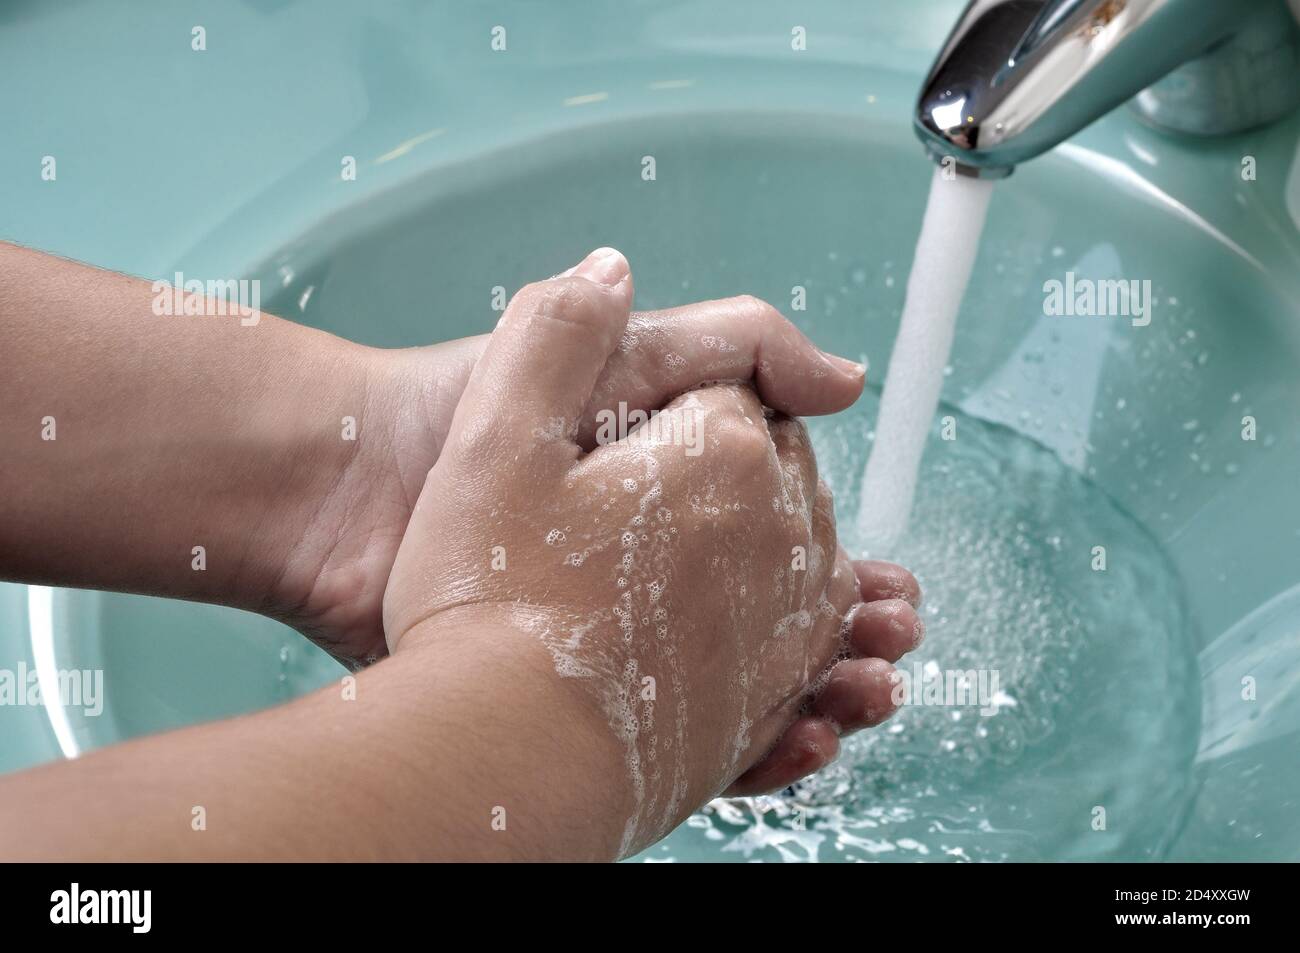 Hands being washed in a green sink during the coronavirus pandemic Stock Photo